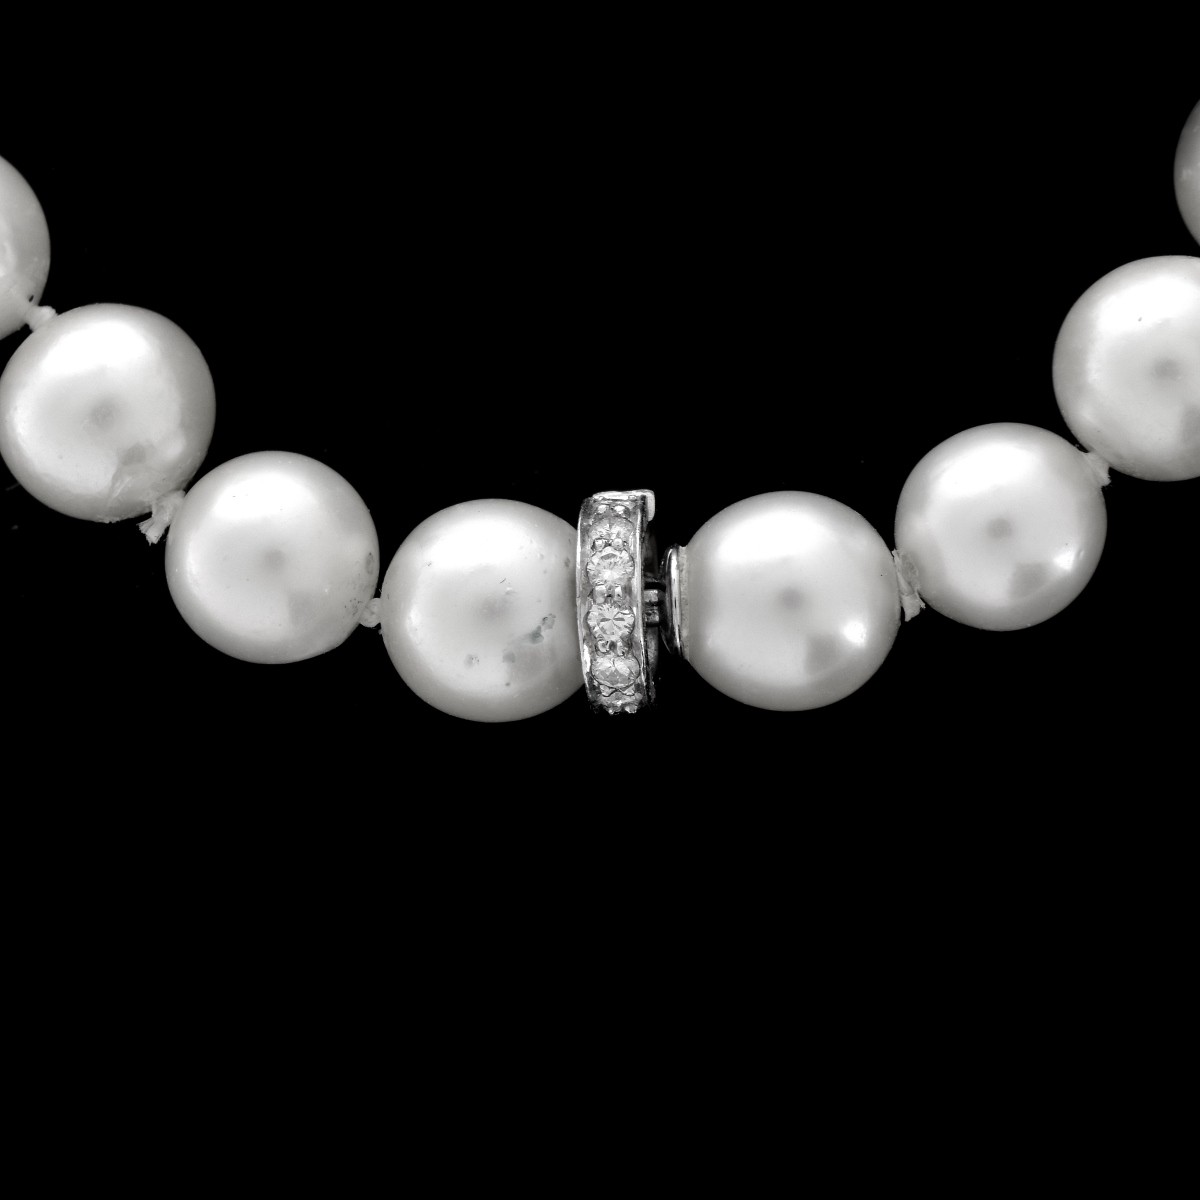 32" 8.5-9mm Pearl and Diamond Necklace